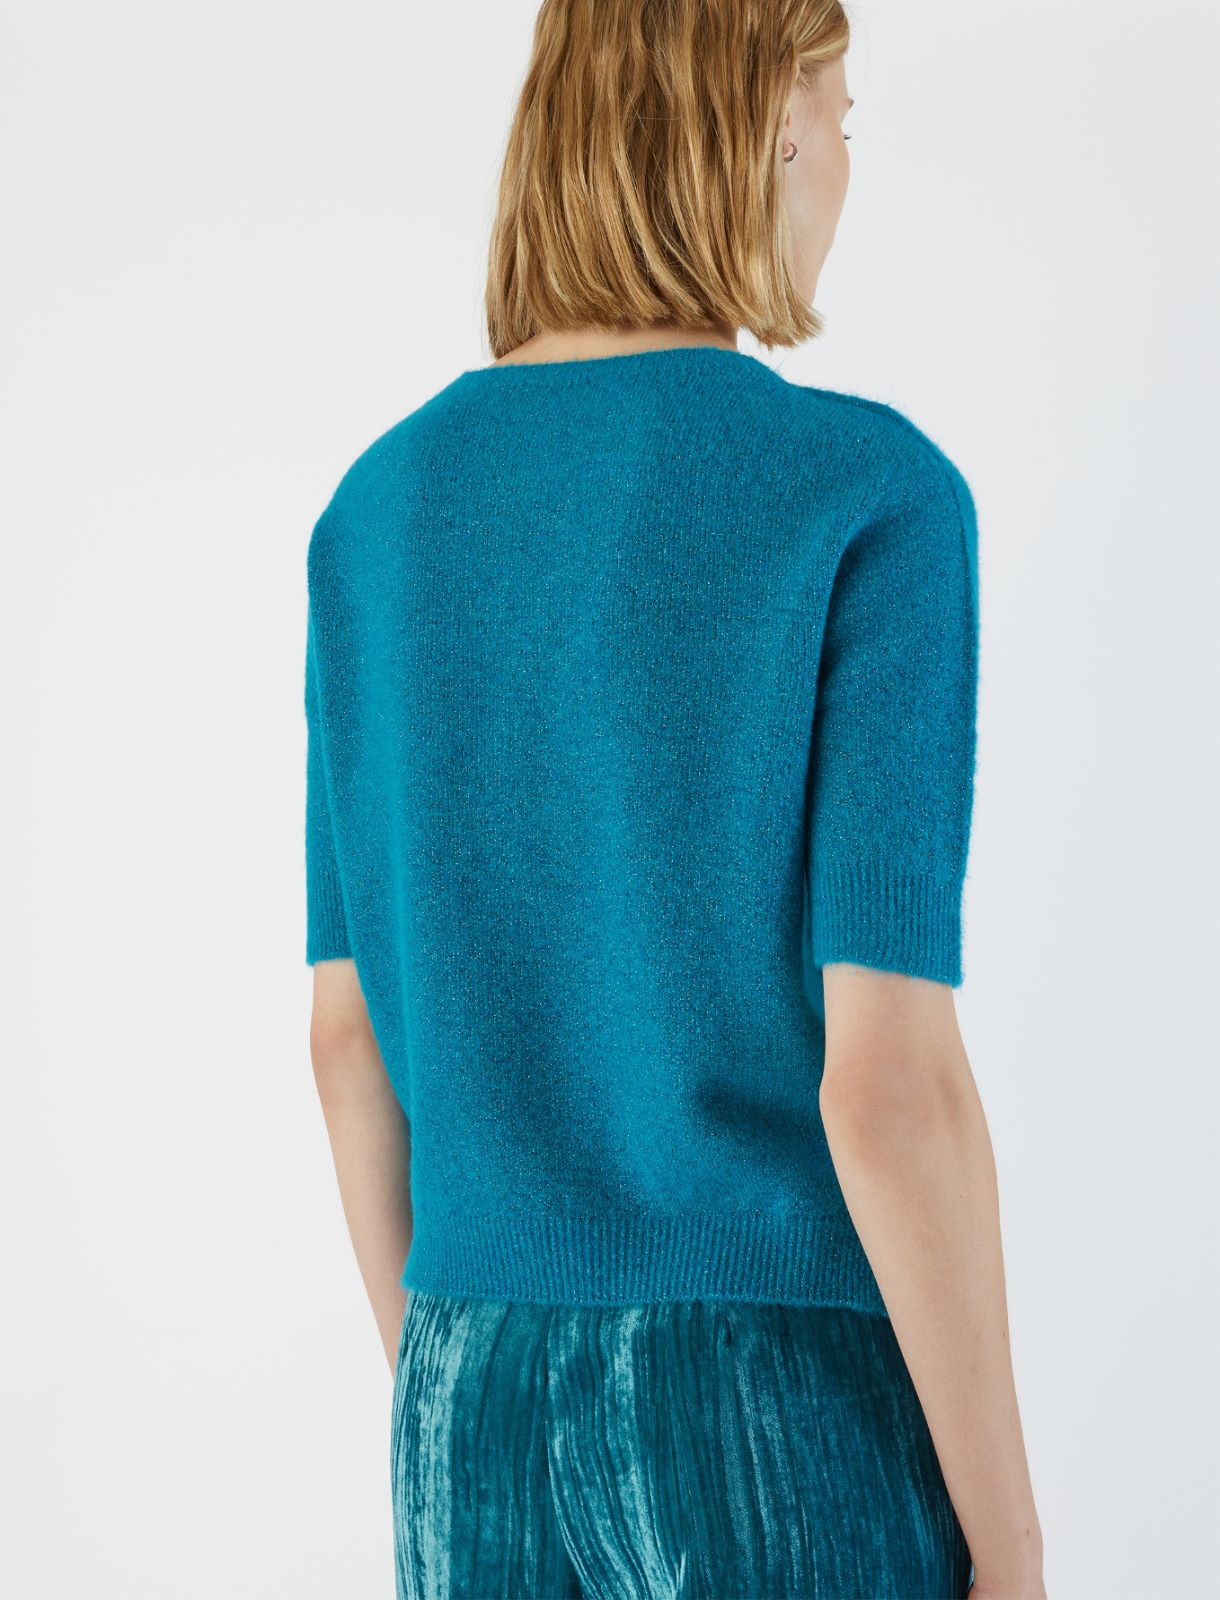 Sweater with feathers - Octane - Marella - 2